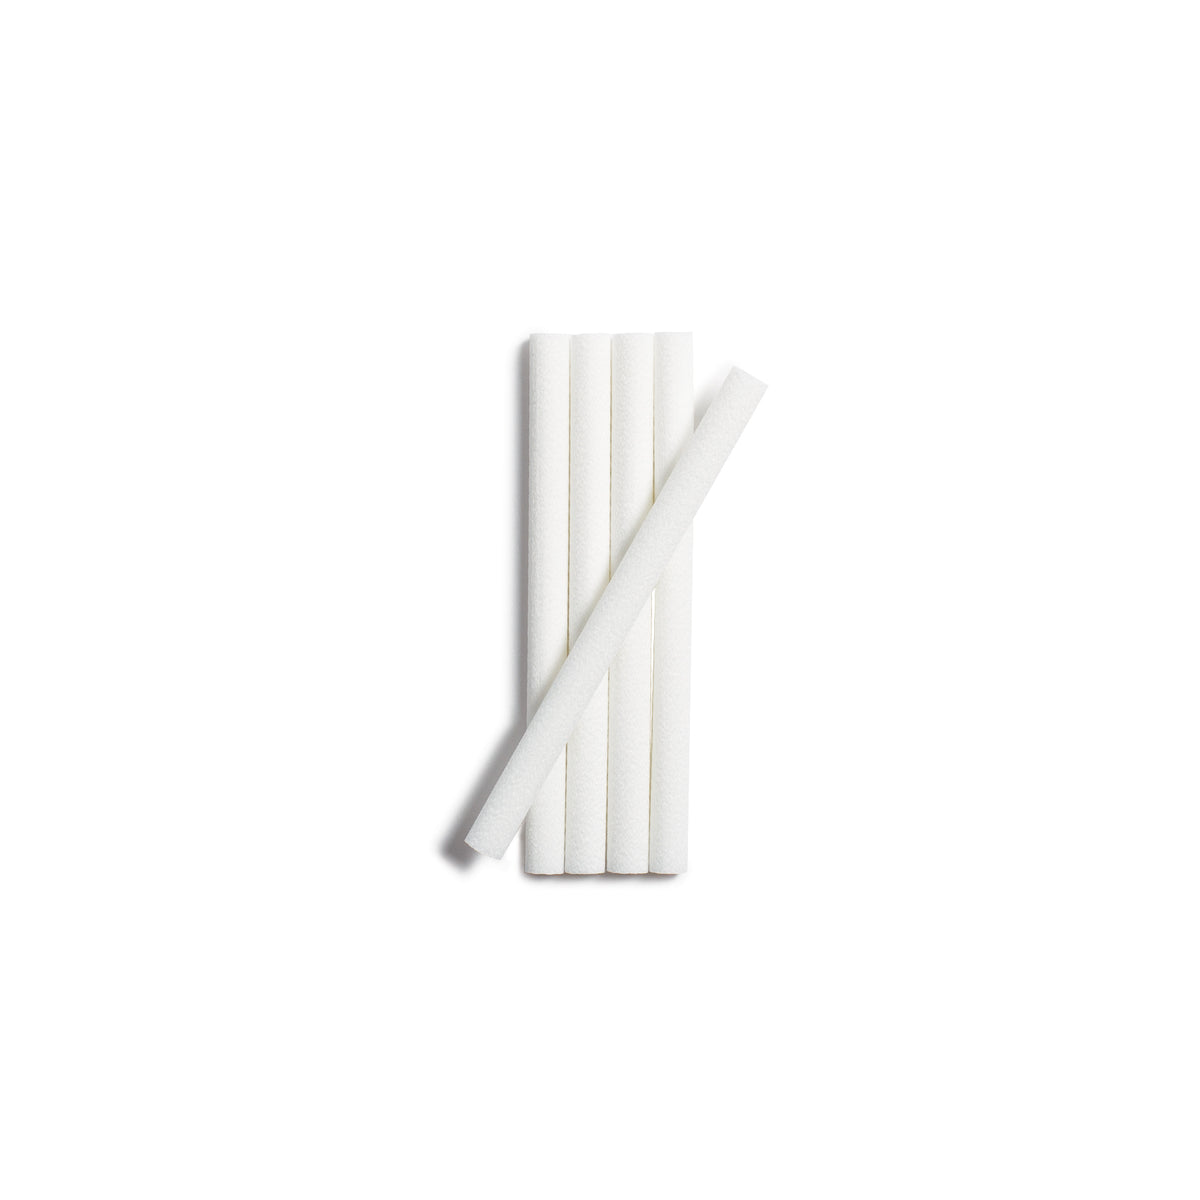 White Rod for Humidifier (5)